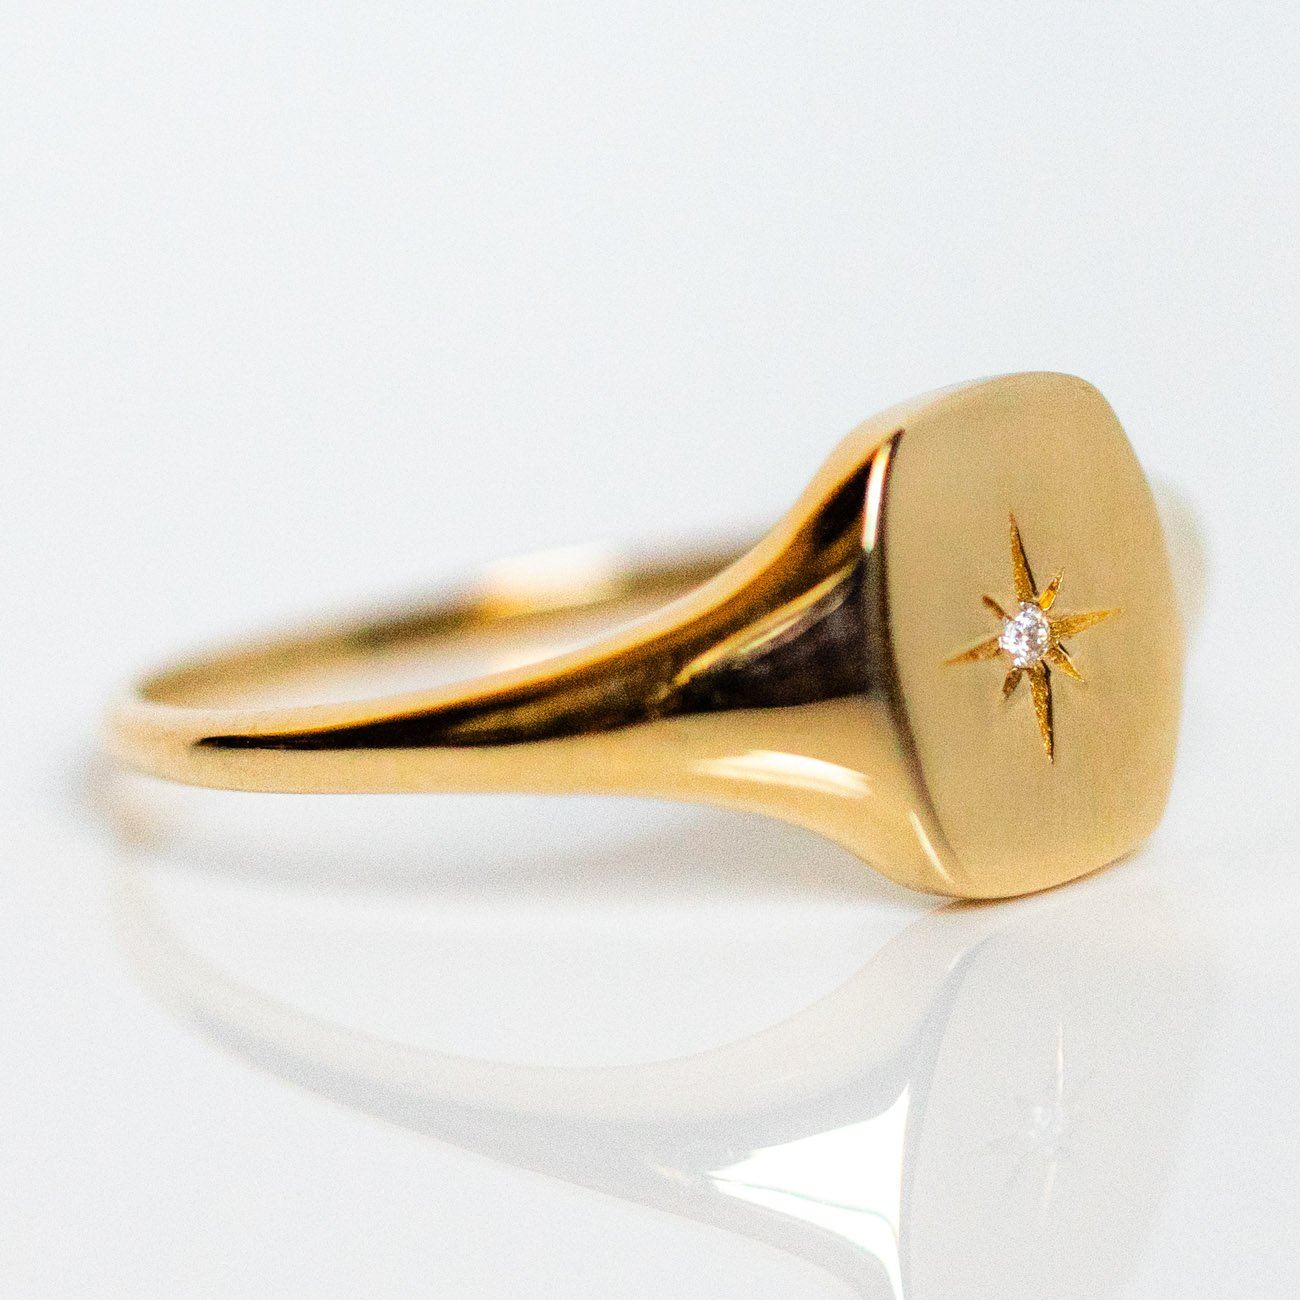 Local Eclectic Sold Gold Signet Ring with Diamond